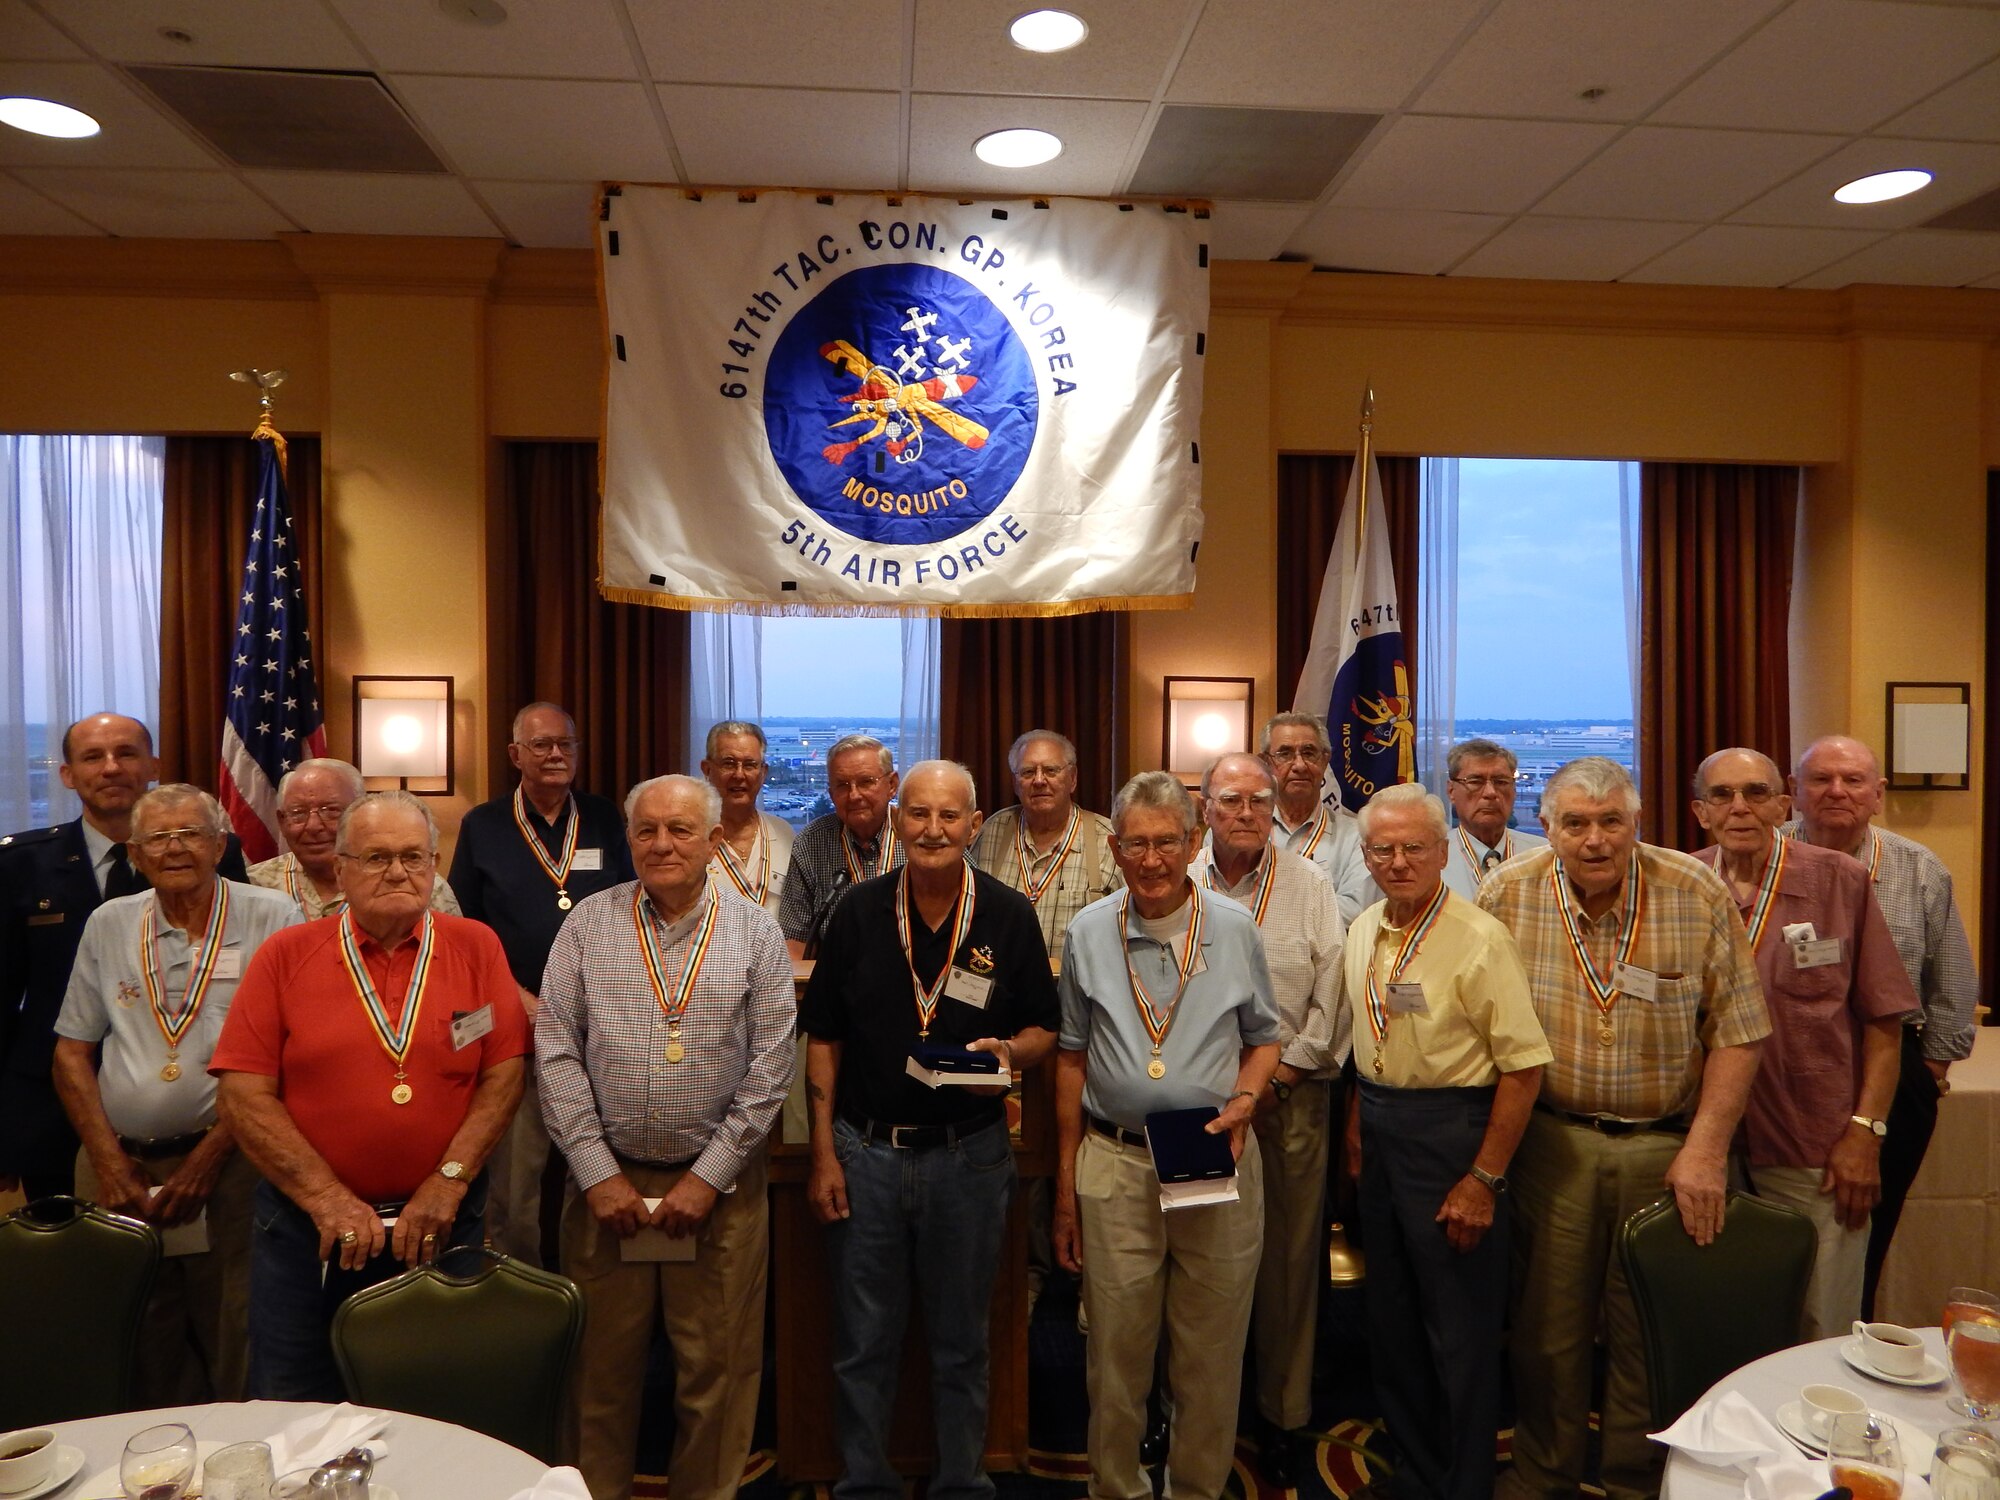 The 6147th Tactical Control Group hosted a reunion banquet Sept. 4 in St. Louis and surprised eighteen of its members by presenting them with the Korean Ambassador for Peace Medal. (U.S. Air Force photo/Christine Spargur)